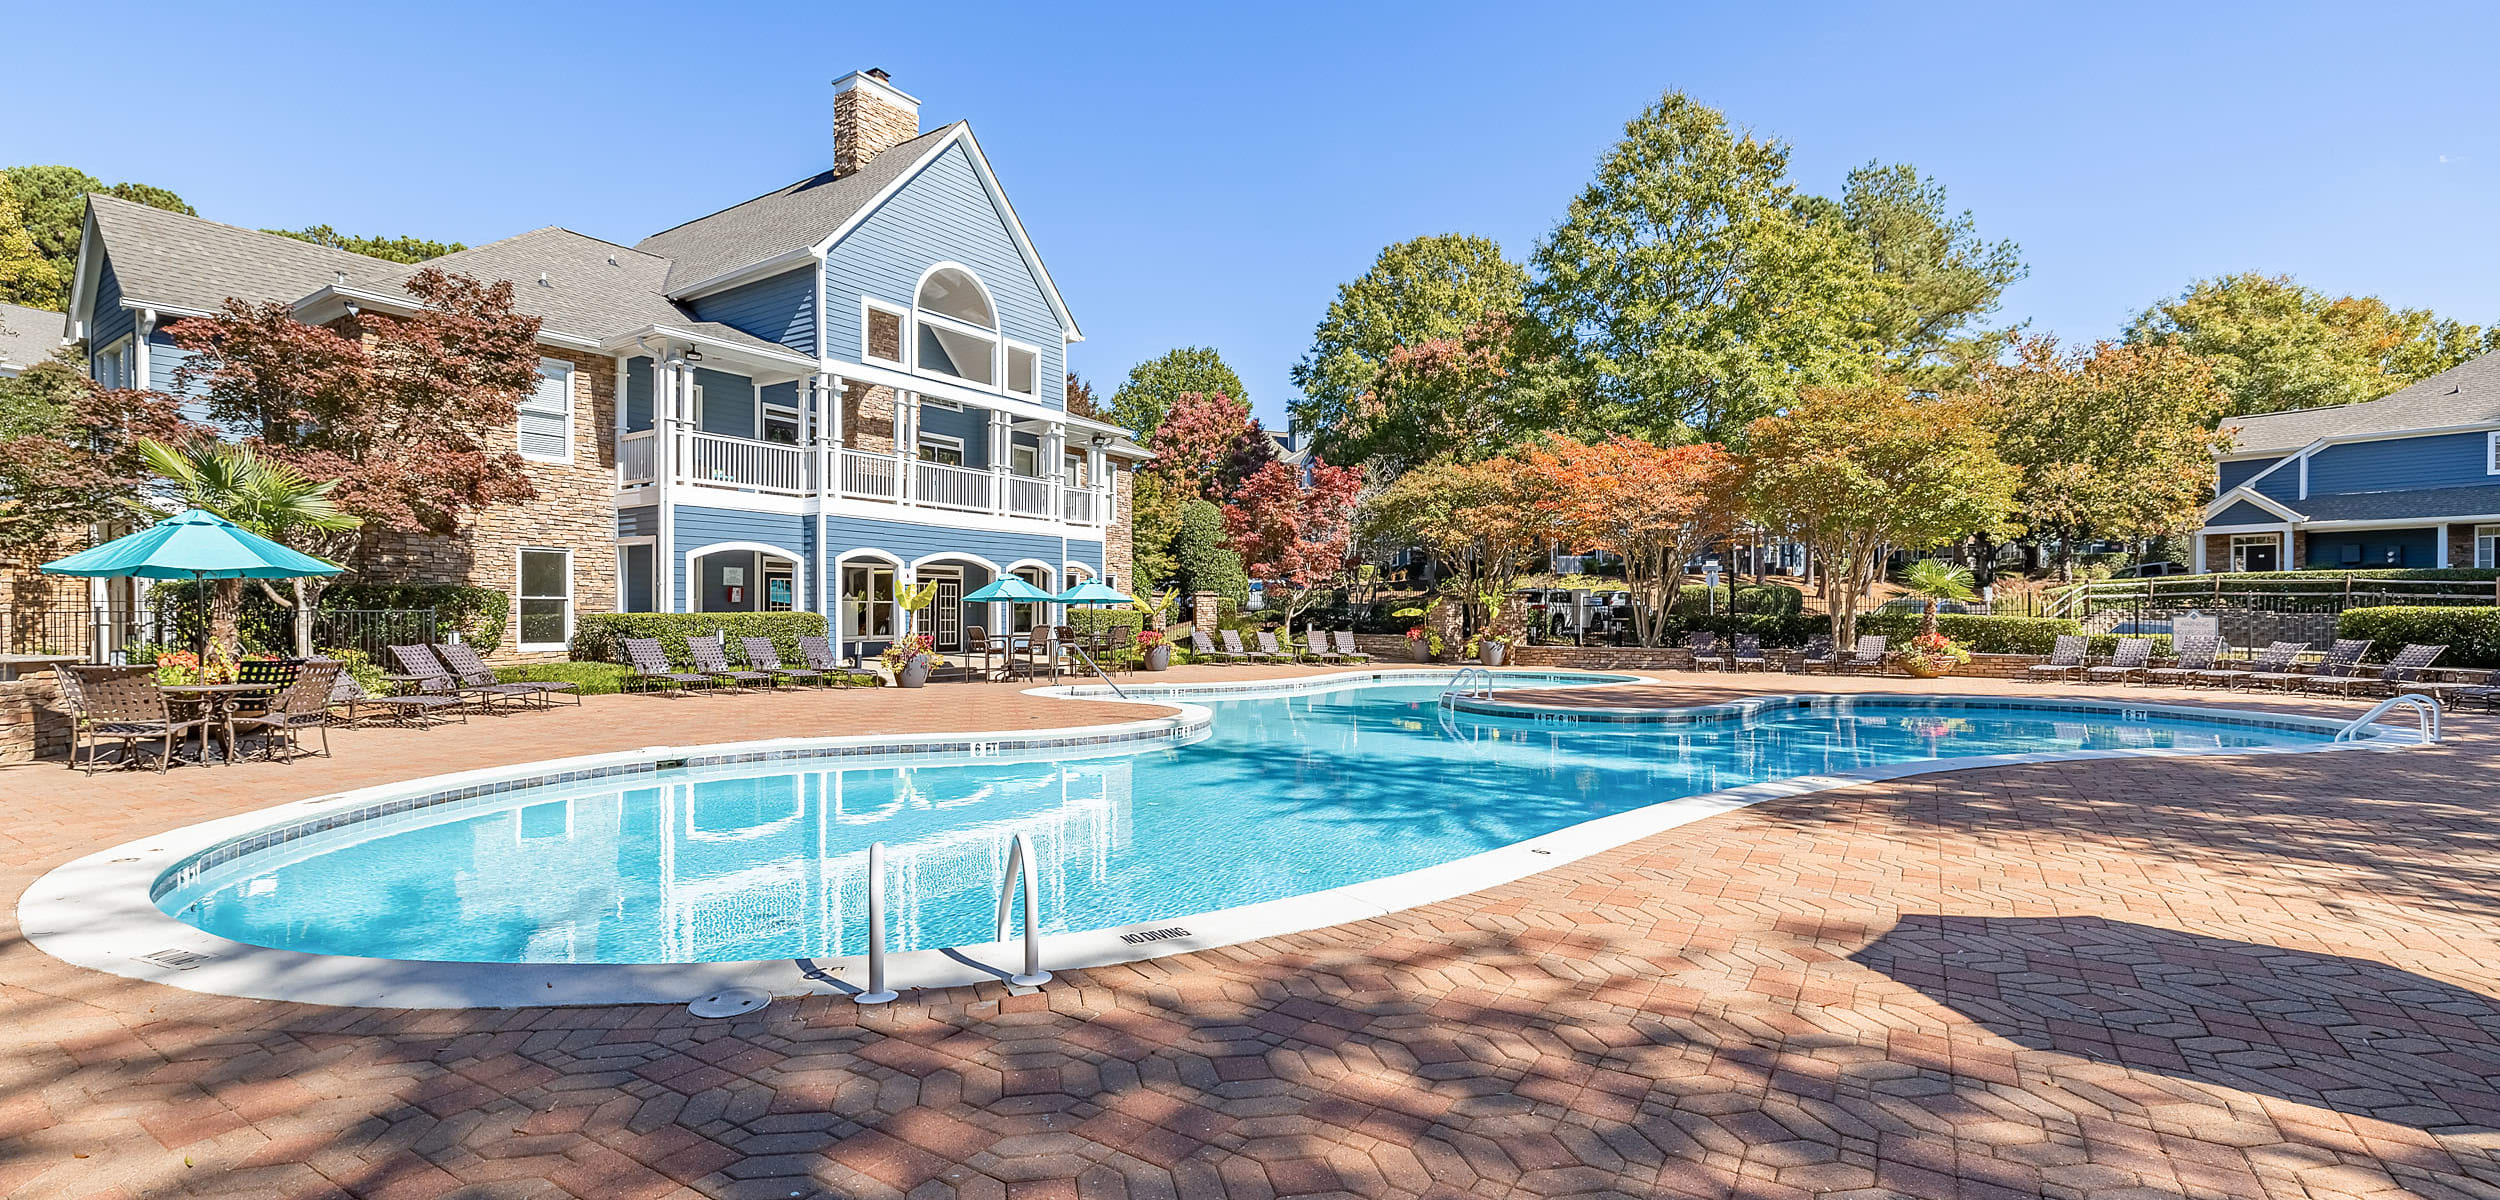 Outdoor pool area at Marquis on Edwards Mill in Raleigh, North Carolina